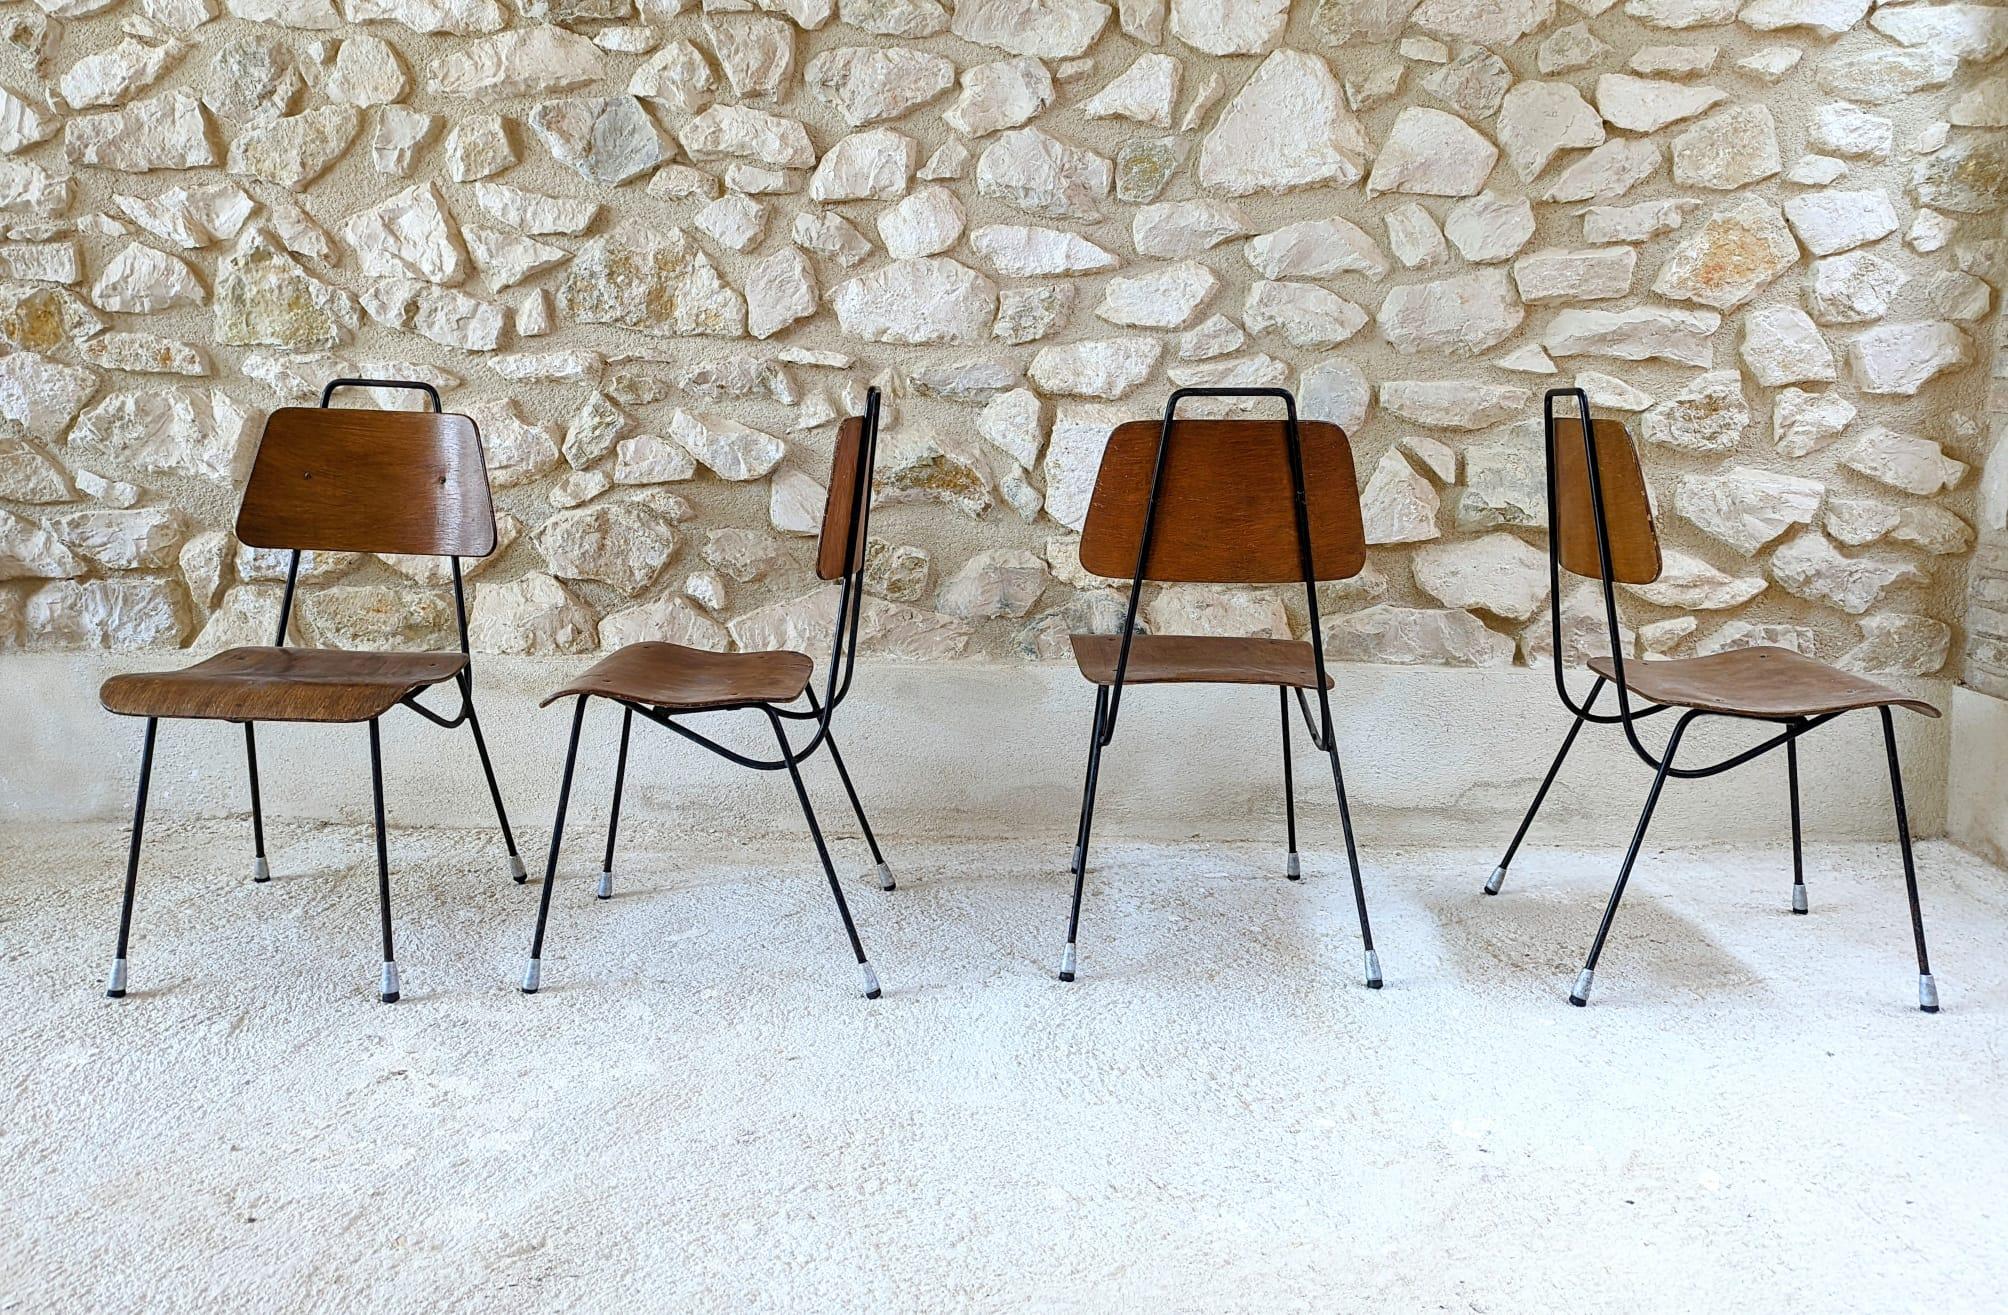 Fabulous set of chairs by renowned designer Antoni de Moragas, made of tubular iron and molded wood. Winners of the first prize in the furniture contest Prodignification of the popular home, 1954, FAD, and National Housing Institute.

The motto of